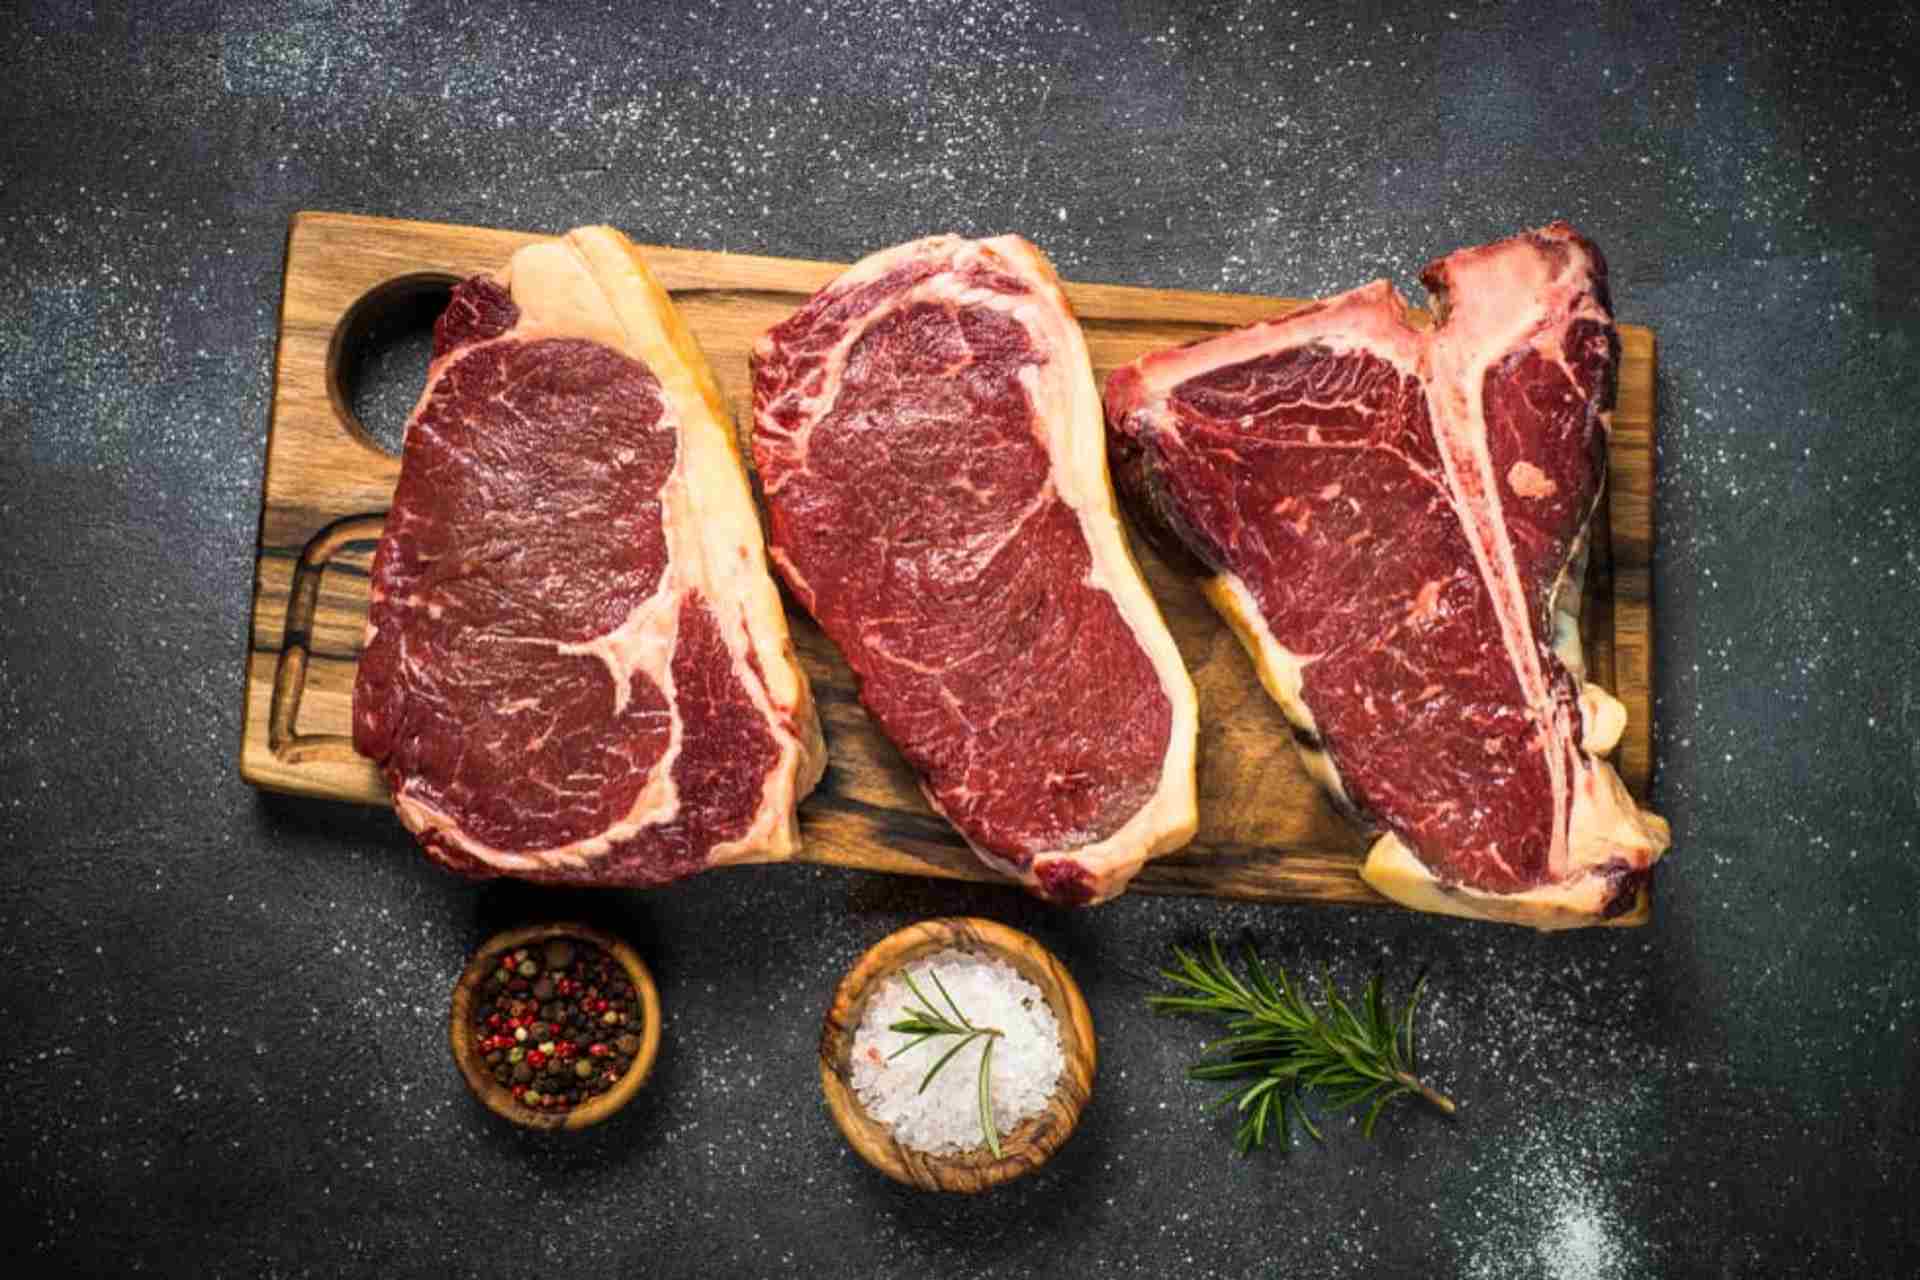 How To Tell If Steak Is Bad?